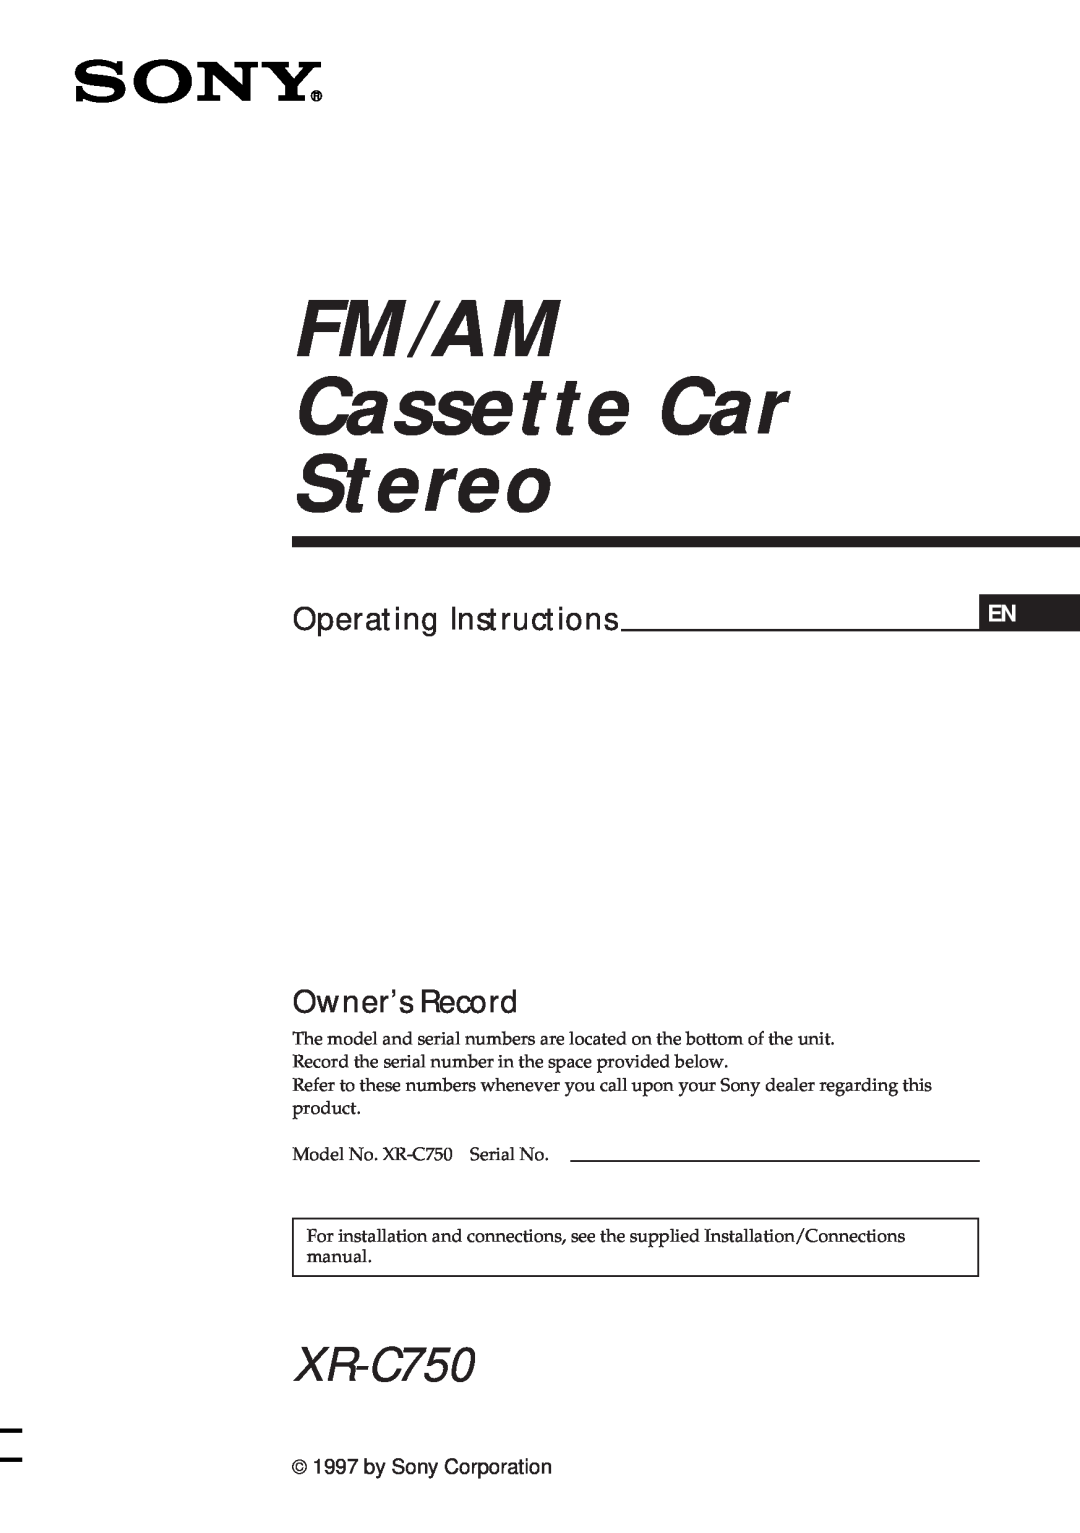 Sony XR-C750 operating instructions by Sony Corporation, FM/AM Cassette Car Stereo, Operating Instructions, Owner’s Record 